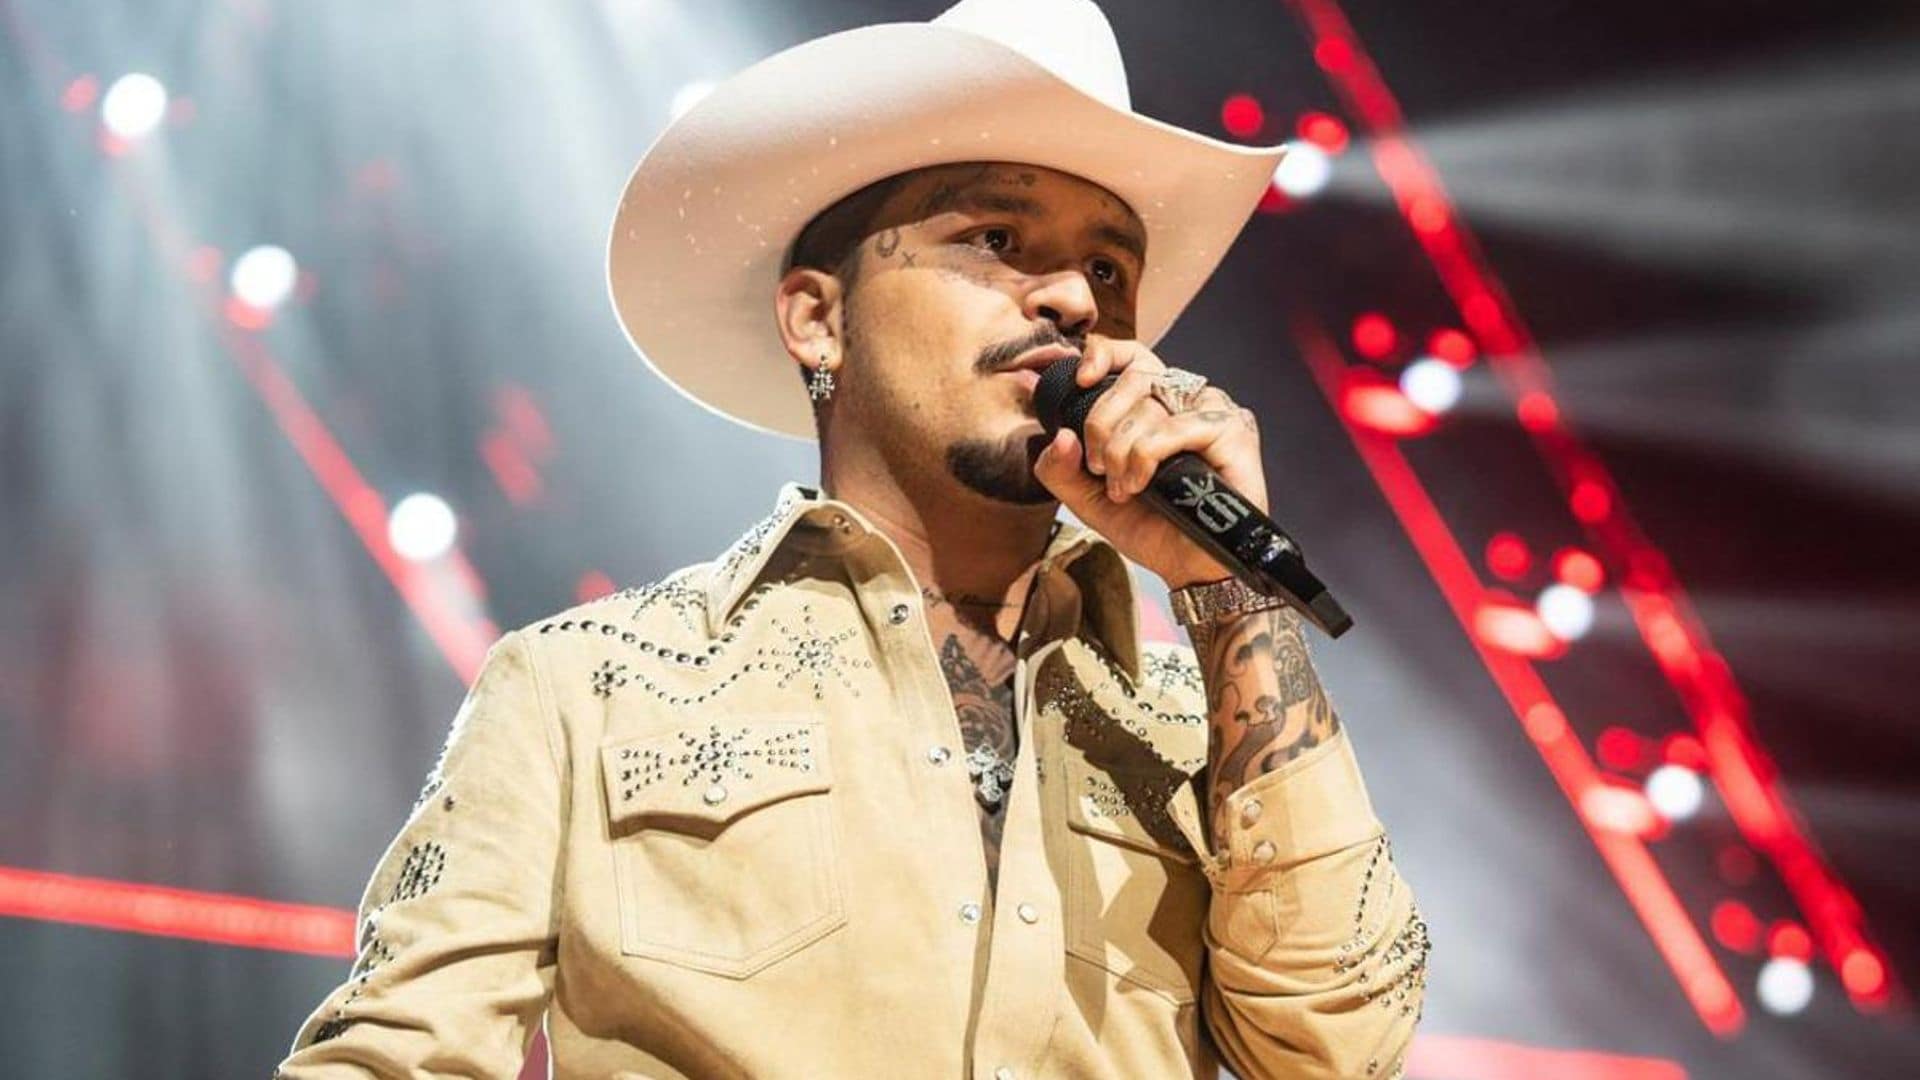 Christian Nodal reacts to incident with Cazzu’s family: ‘You’re hurting the people I love’